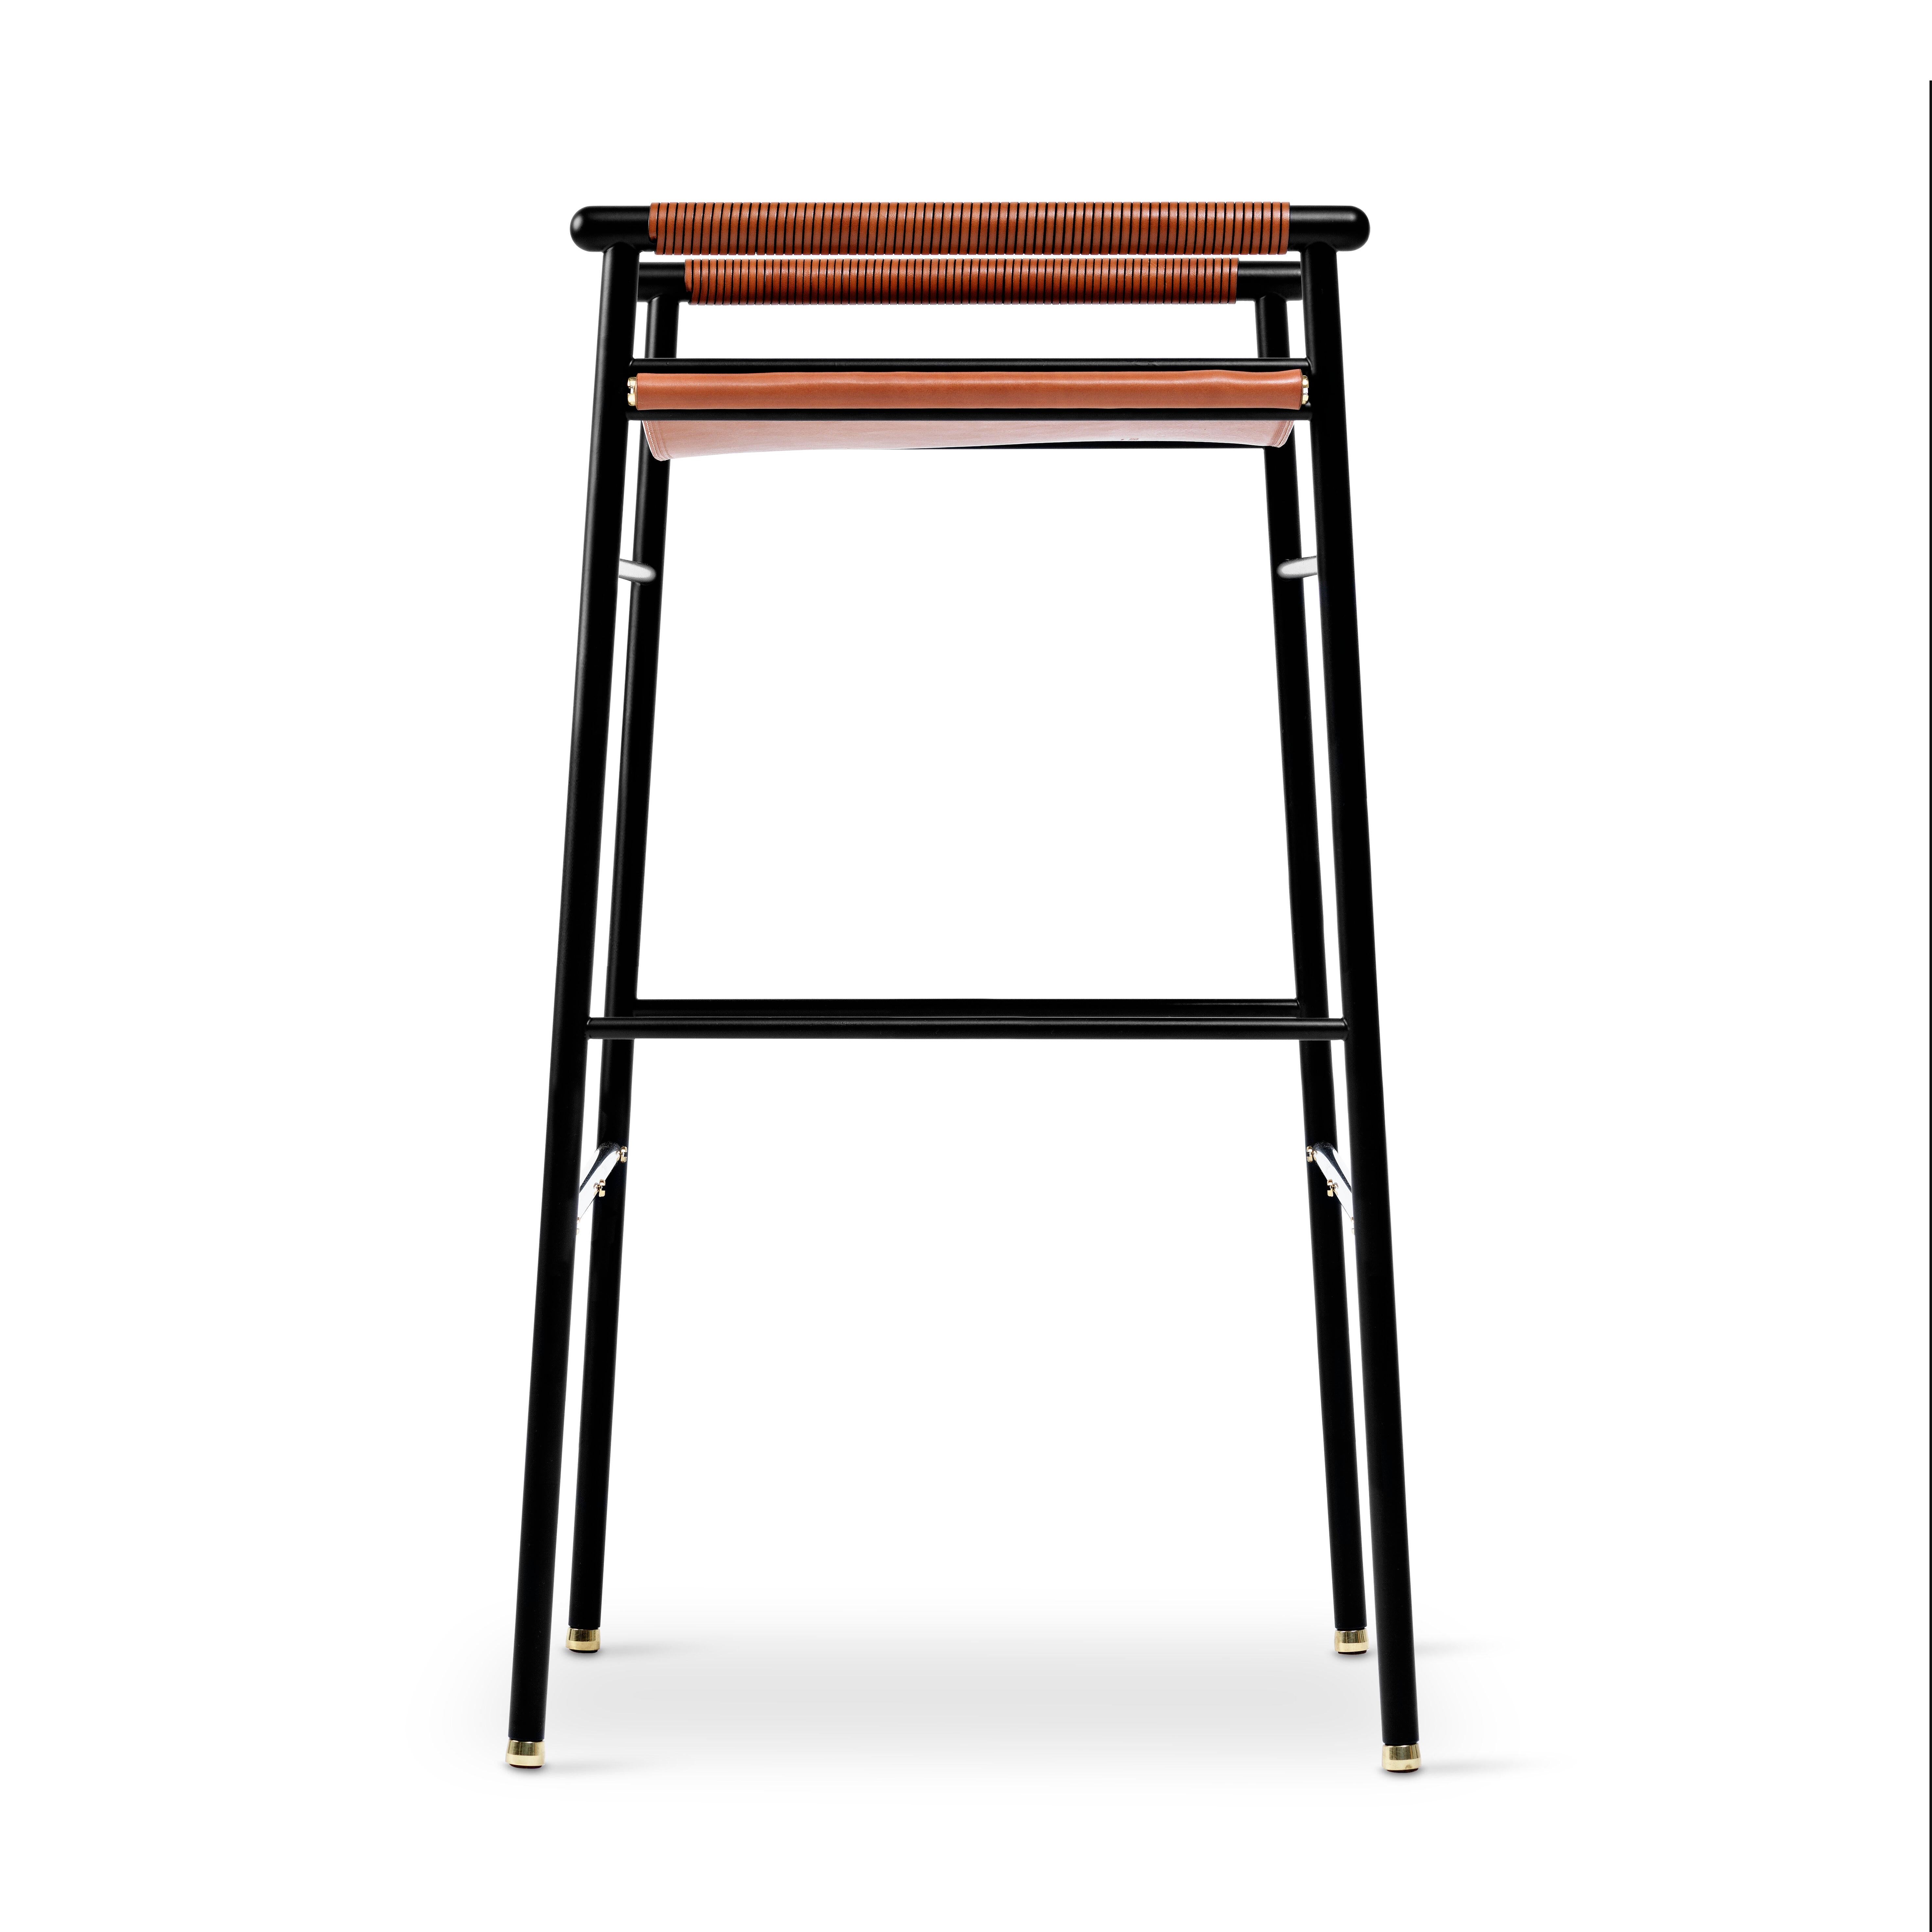 The “Repose” contemporary barstool belongs to a collection that revisit the director chair collection, serene pieces where exclusivity and precision are shown in small details such as the hand-turned metal nuts and bolts that fix the leather